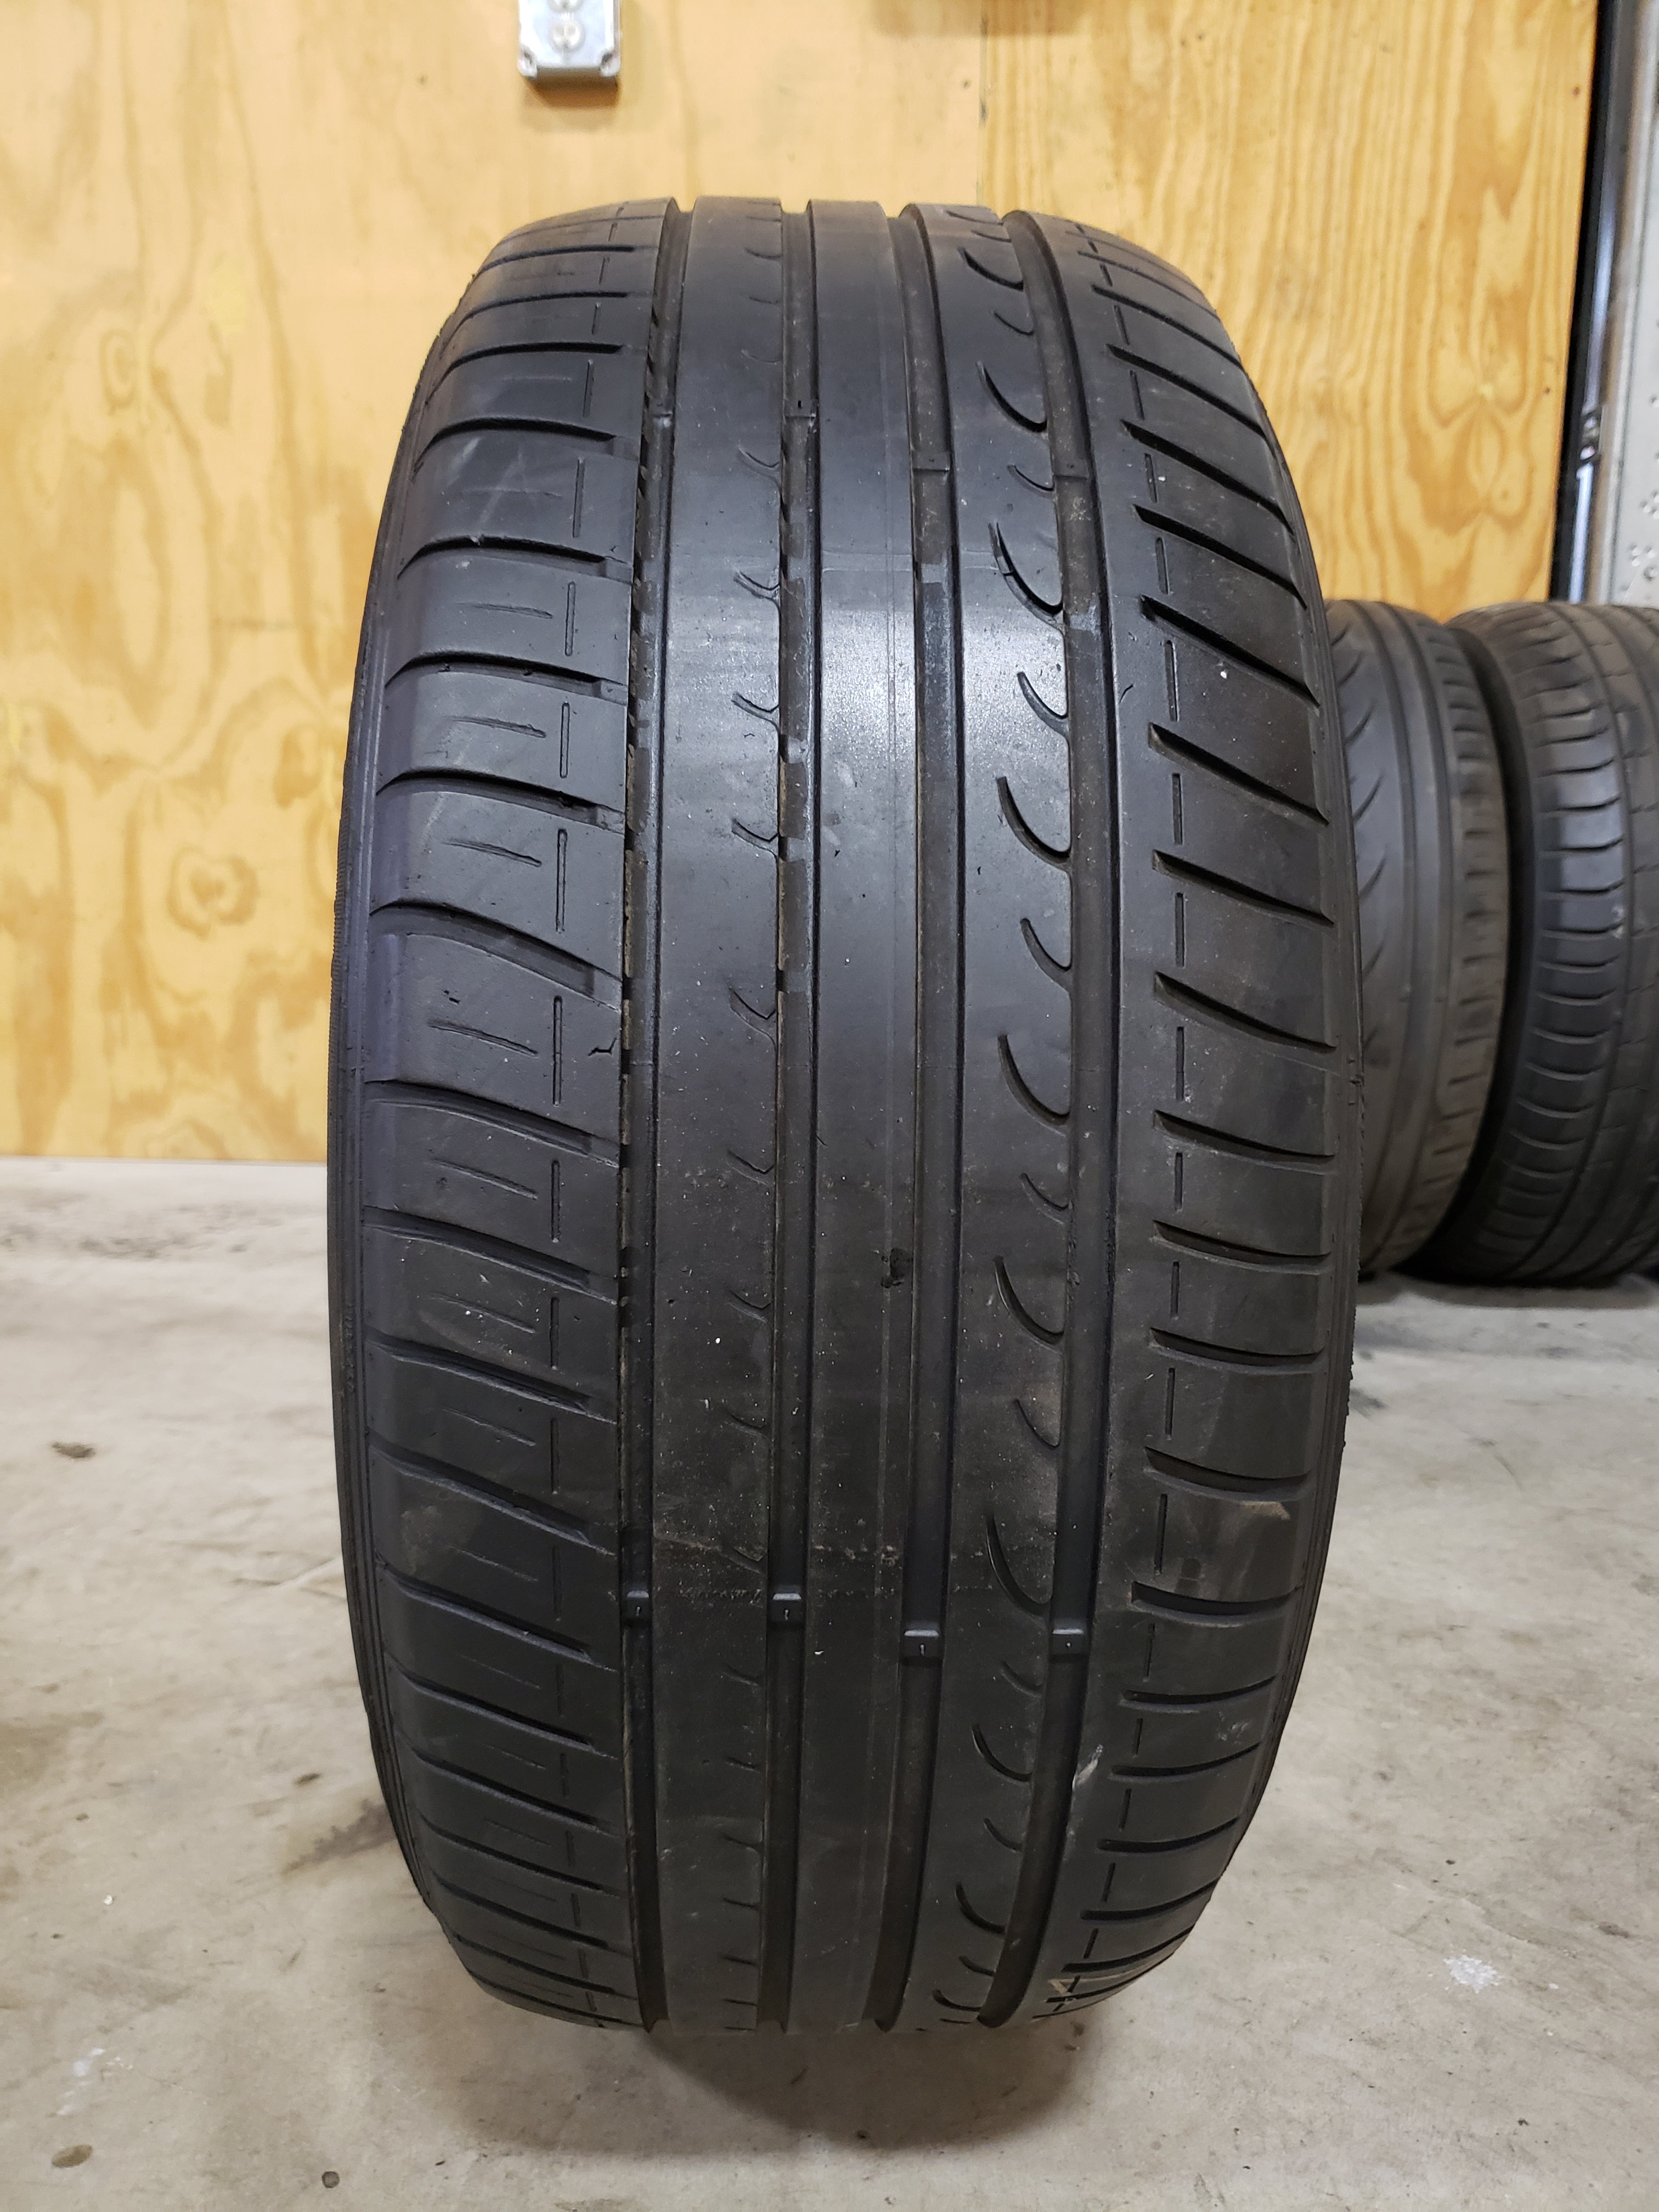 Fast Tires - 225/55R16 Tires Sport XL High SP 95V – Response SINGLE Used | Dunlop Used Tread